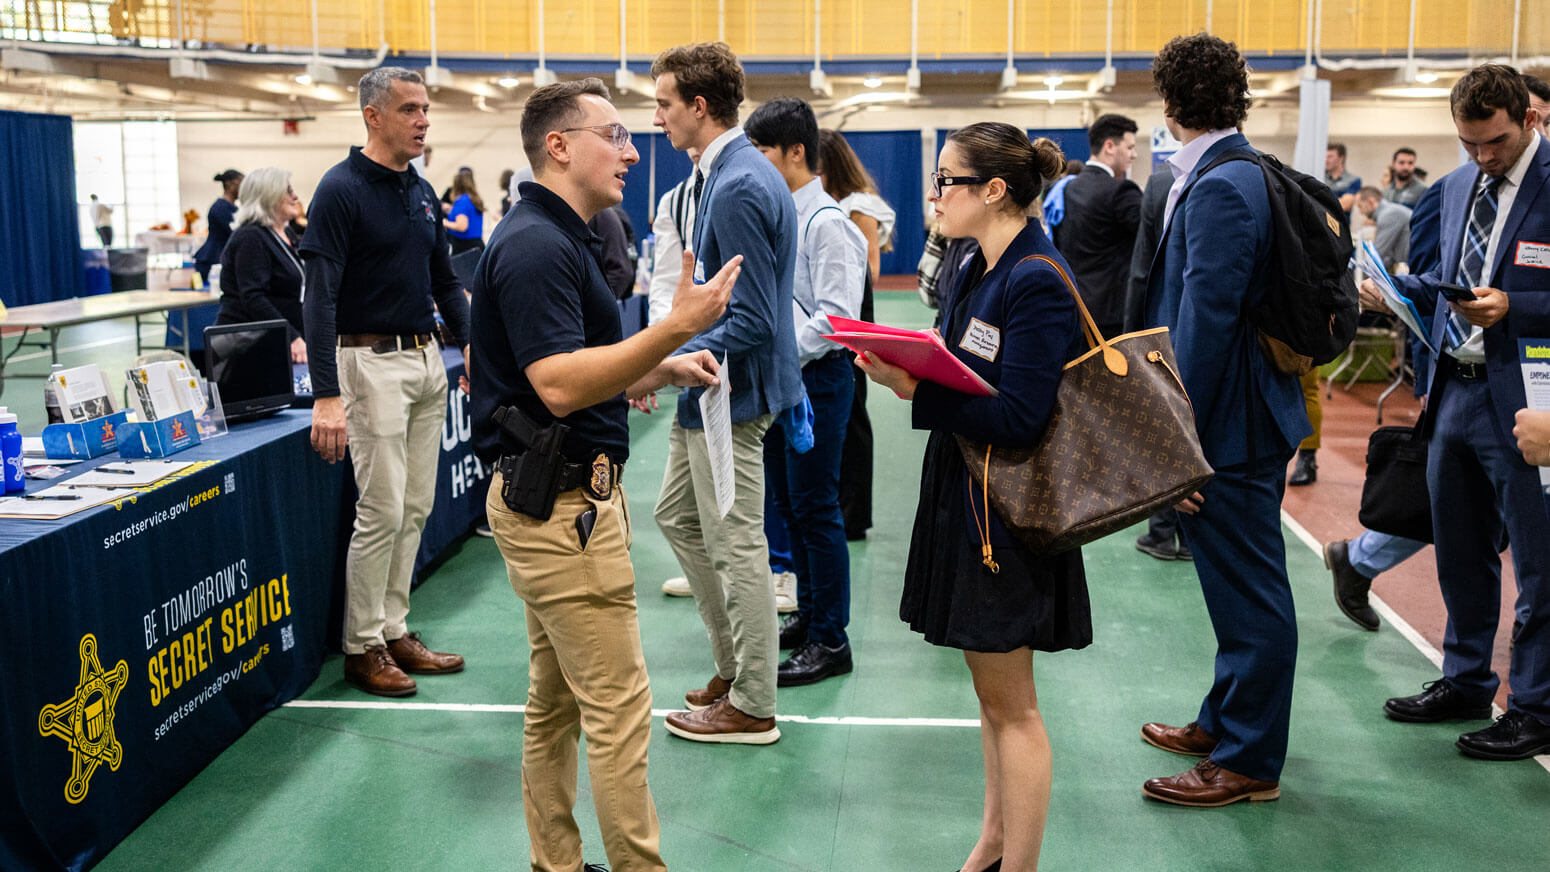 Students interact with brand representatives during the University career fair.